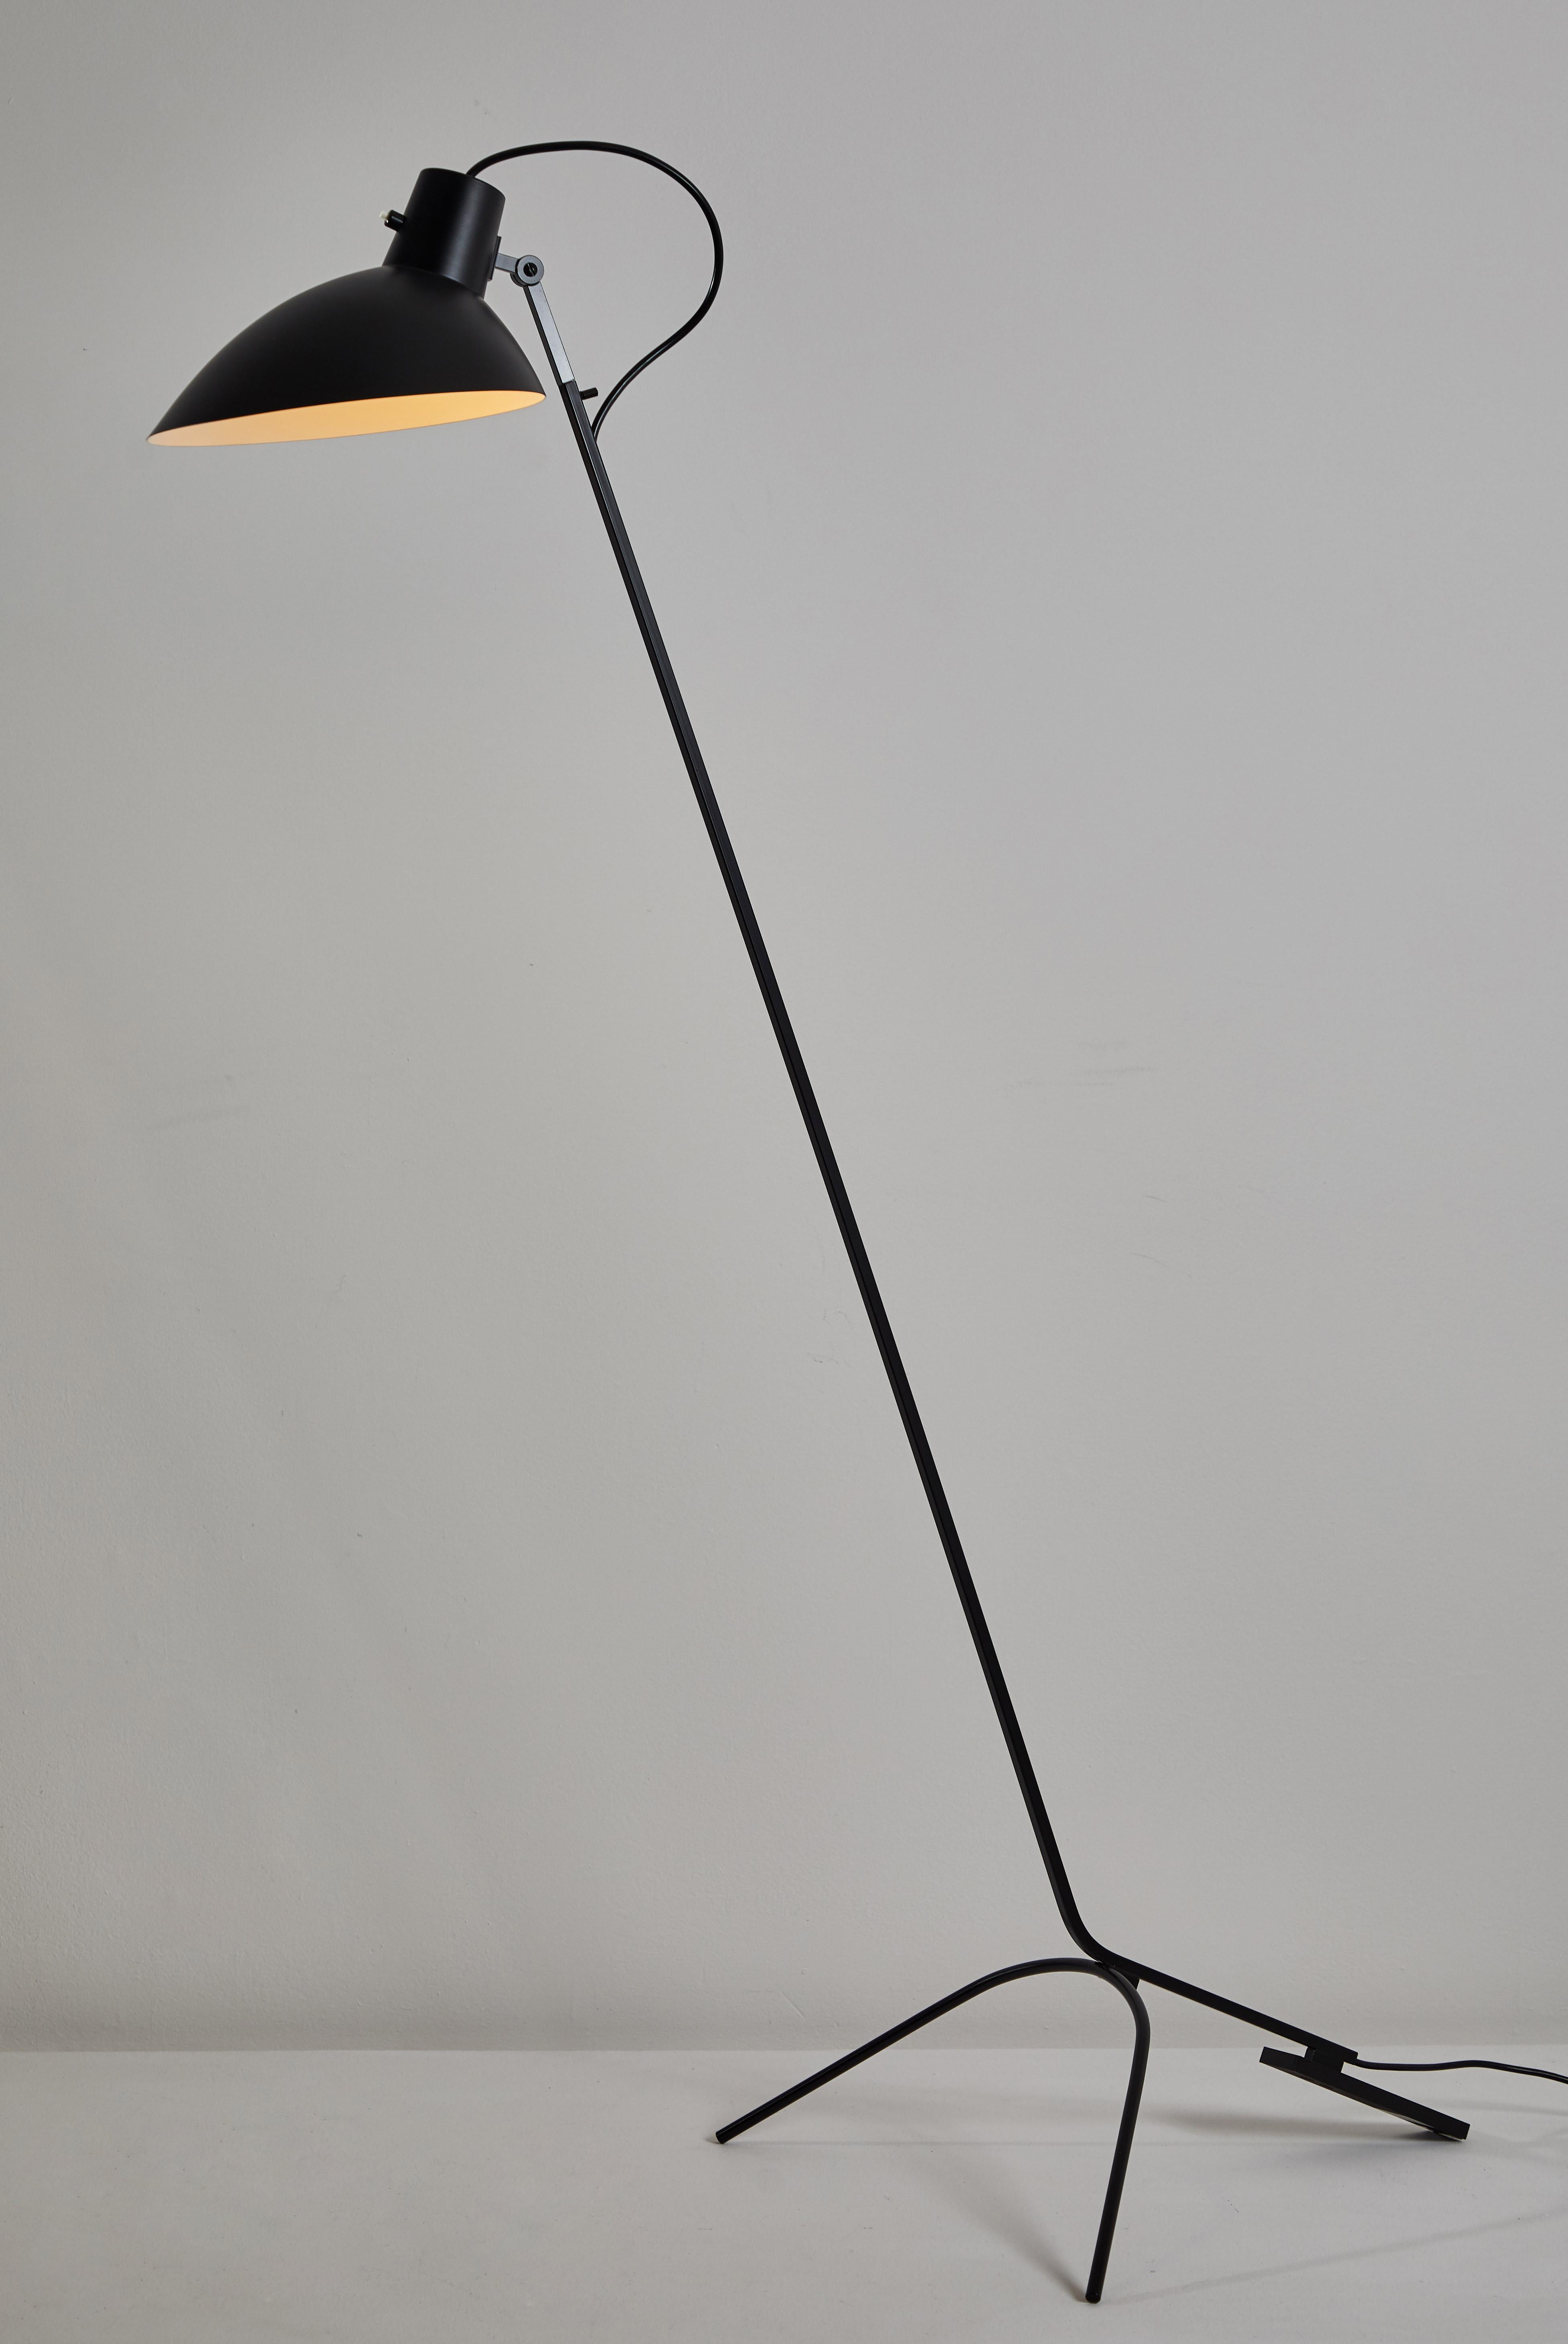 VV Cinquanta floor light by Vittoriano Viganó. Originally designed in Italy, 1951. This light is a current production with an 8-10 week lead time. Spun aluminum reflector, enameled steel structure. Reflector adjust to various positions. Takes one